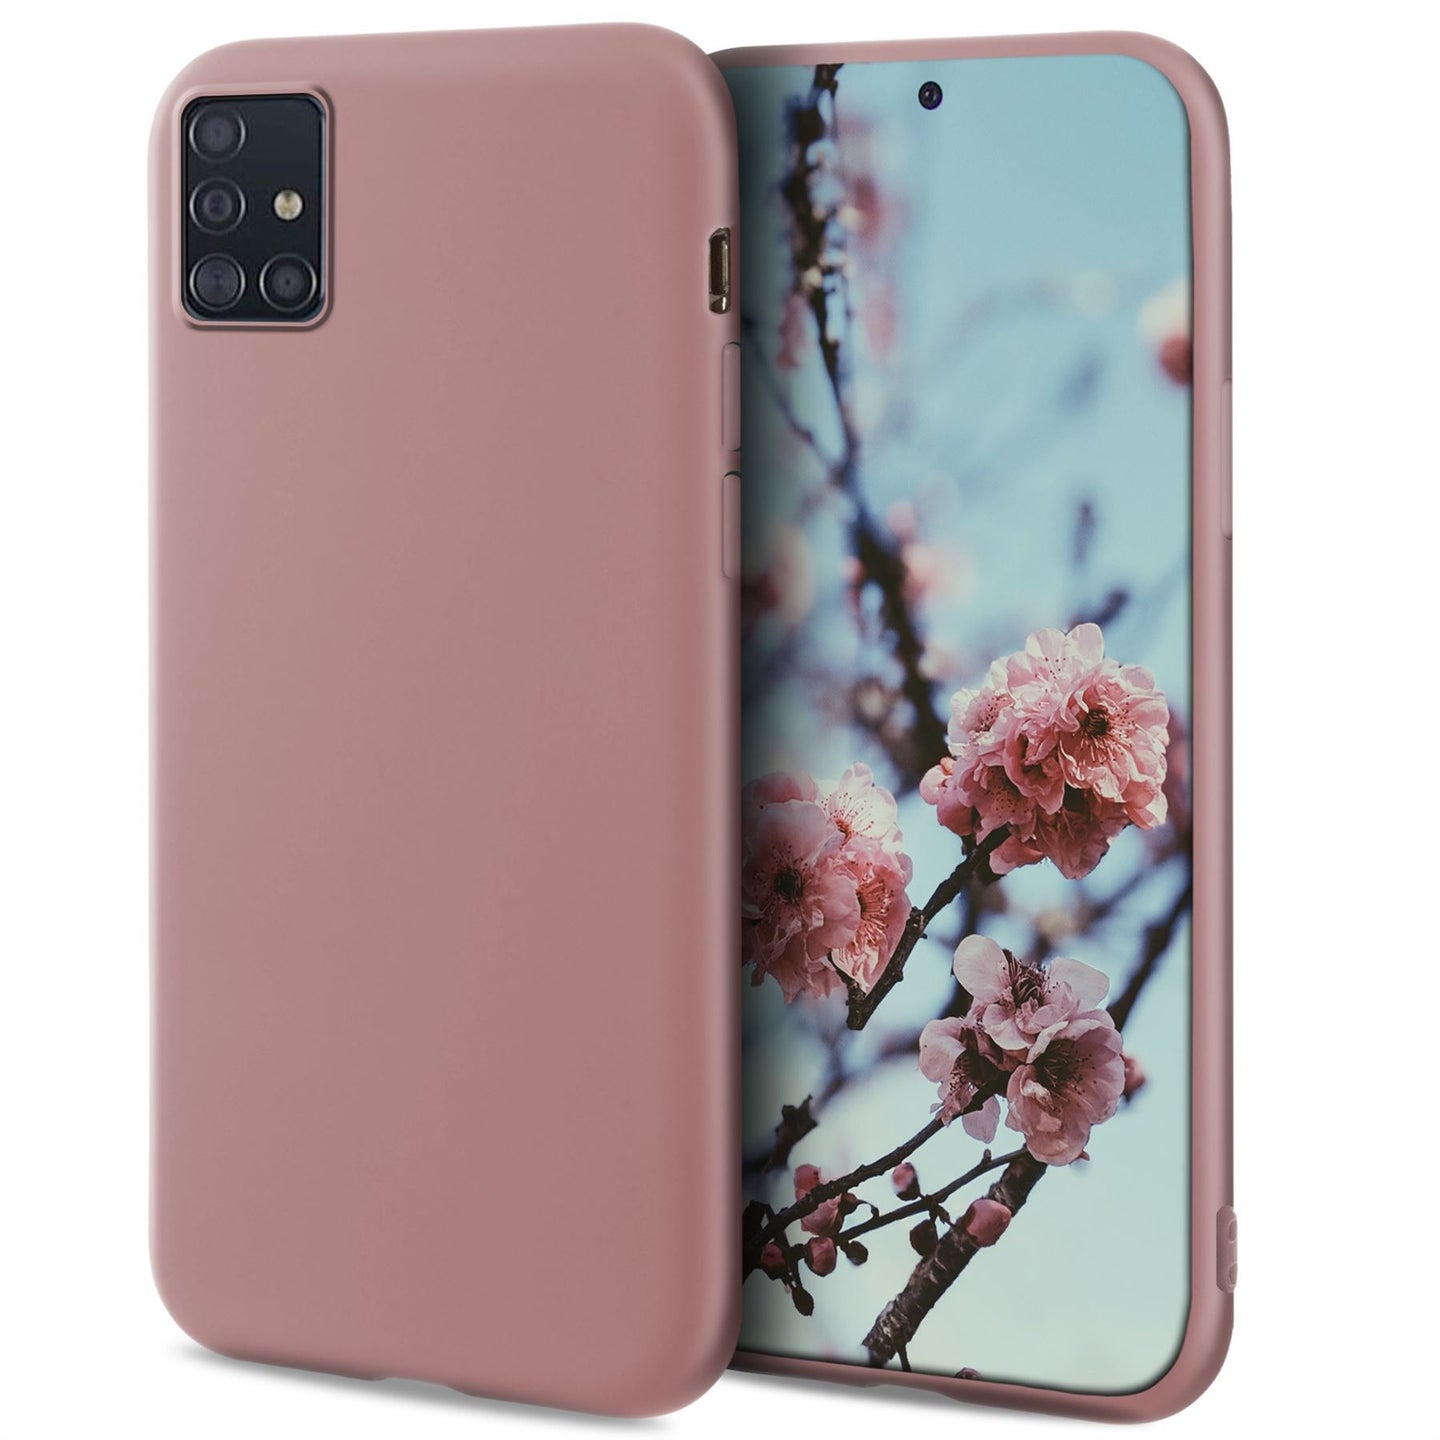 Moozy Minimalist Series Silicone Case for Samsung A51, Rose Beige - Matte Finish Slim Soft TPU Cover